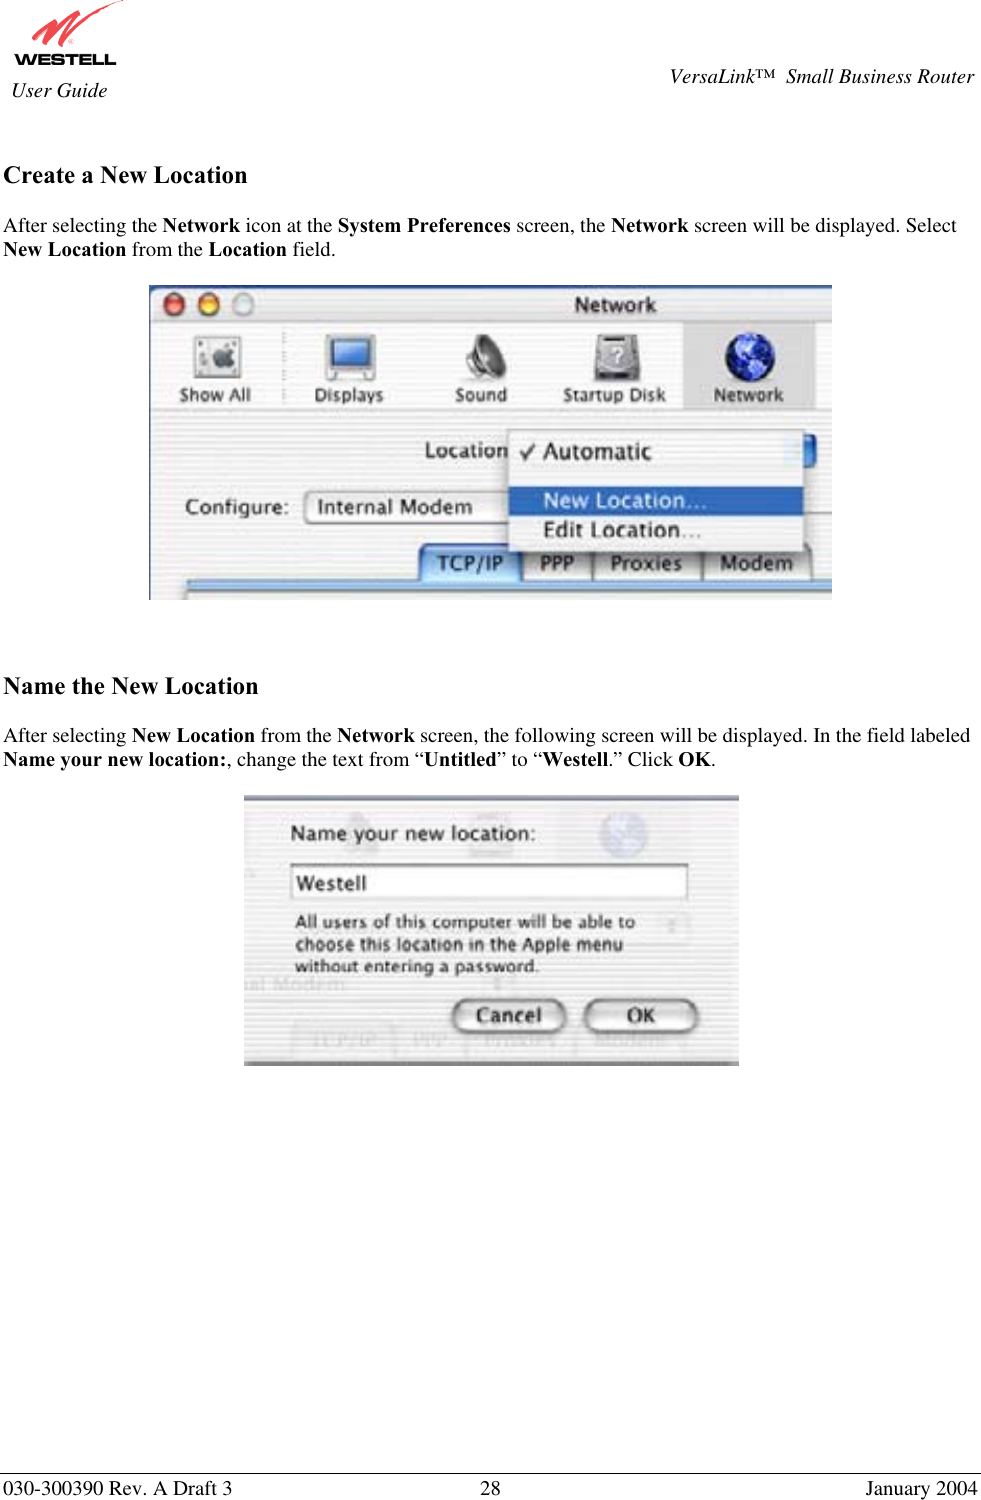       030-300390 Rev. A Draft 3  28  January 2004  VersaLink™  Small Business Router  User Guide  Create a New Location   After selecting the Network icon at the System Preferences screen, the Network screen will be displayed. Select New Location from the Location field.      Name the New Location  After selecting New Location from the Network screen, the following screen will be displayed. In the field labeled Name your new location:, change the text from “Untitled” to “Westell.” Click OK.                 